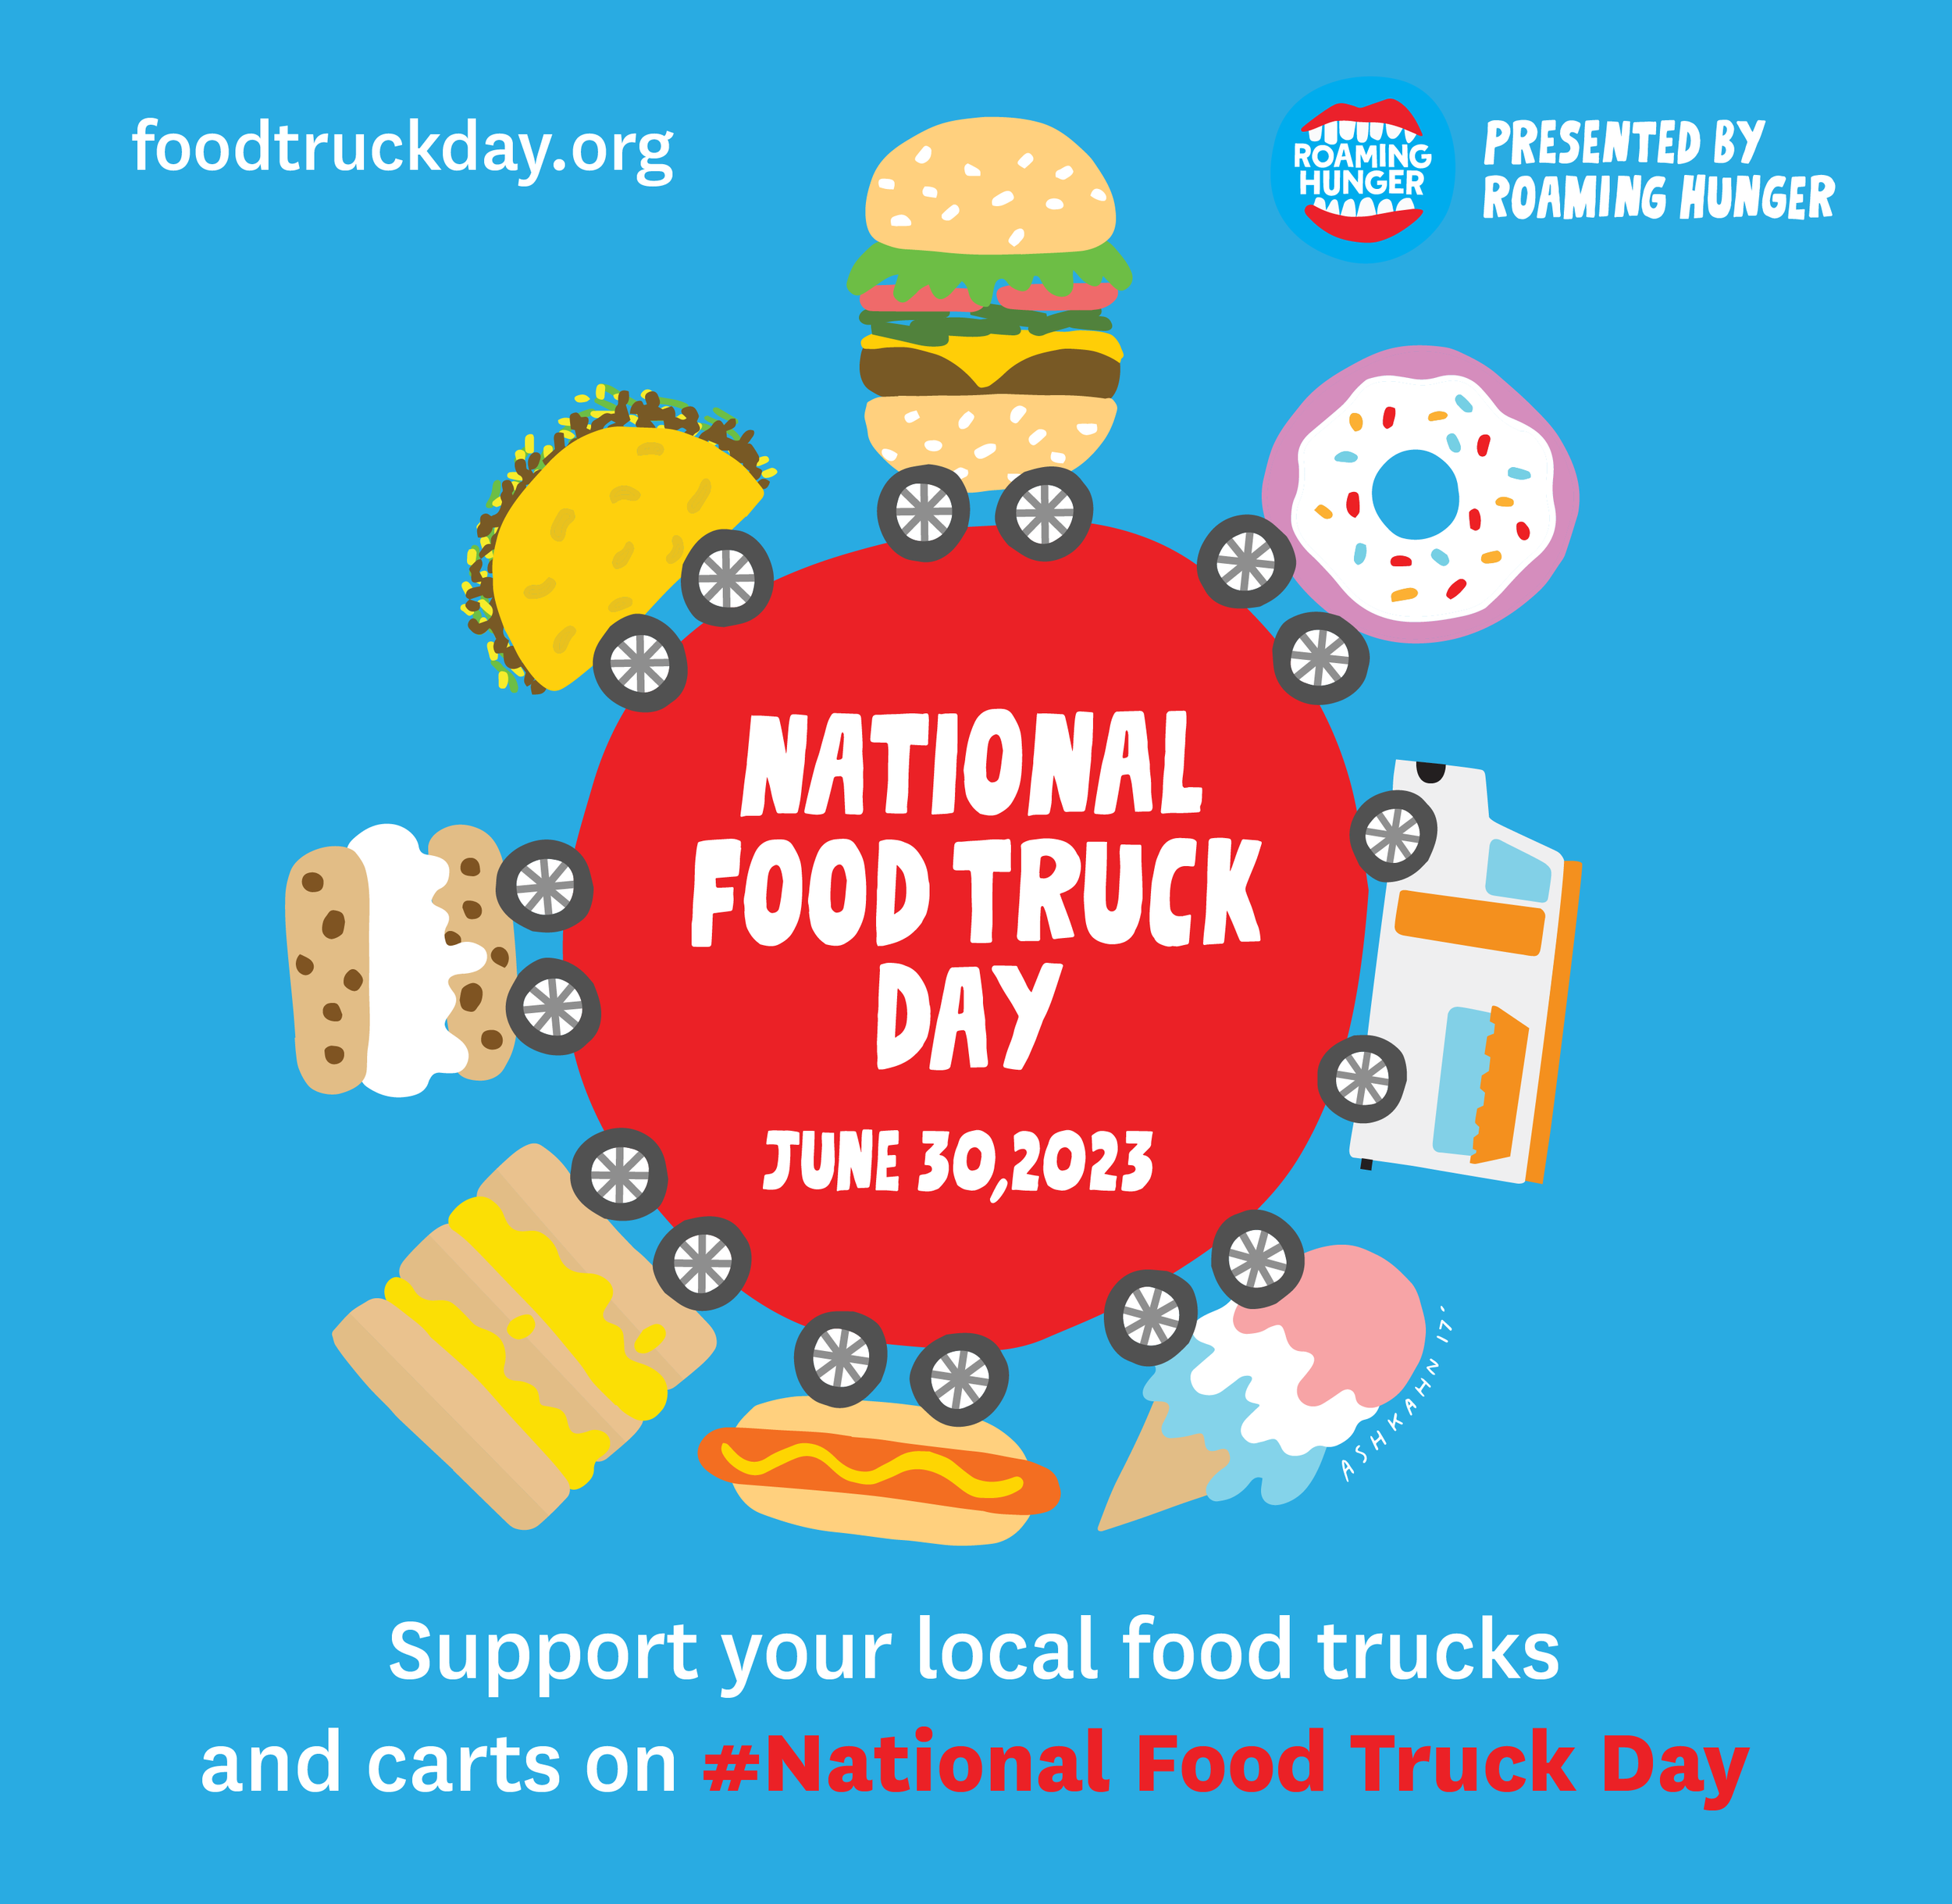 SHARE NATIONAL FOOD TRUCK DAY! — National Food Truck Day